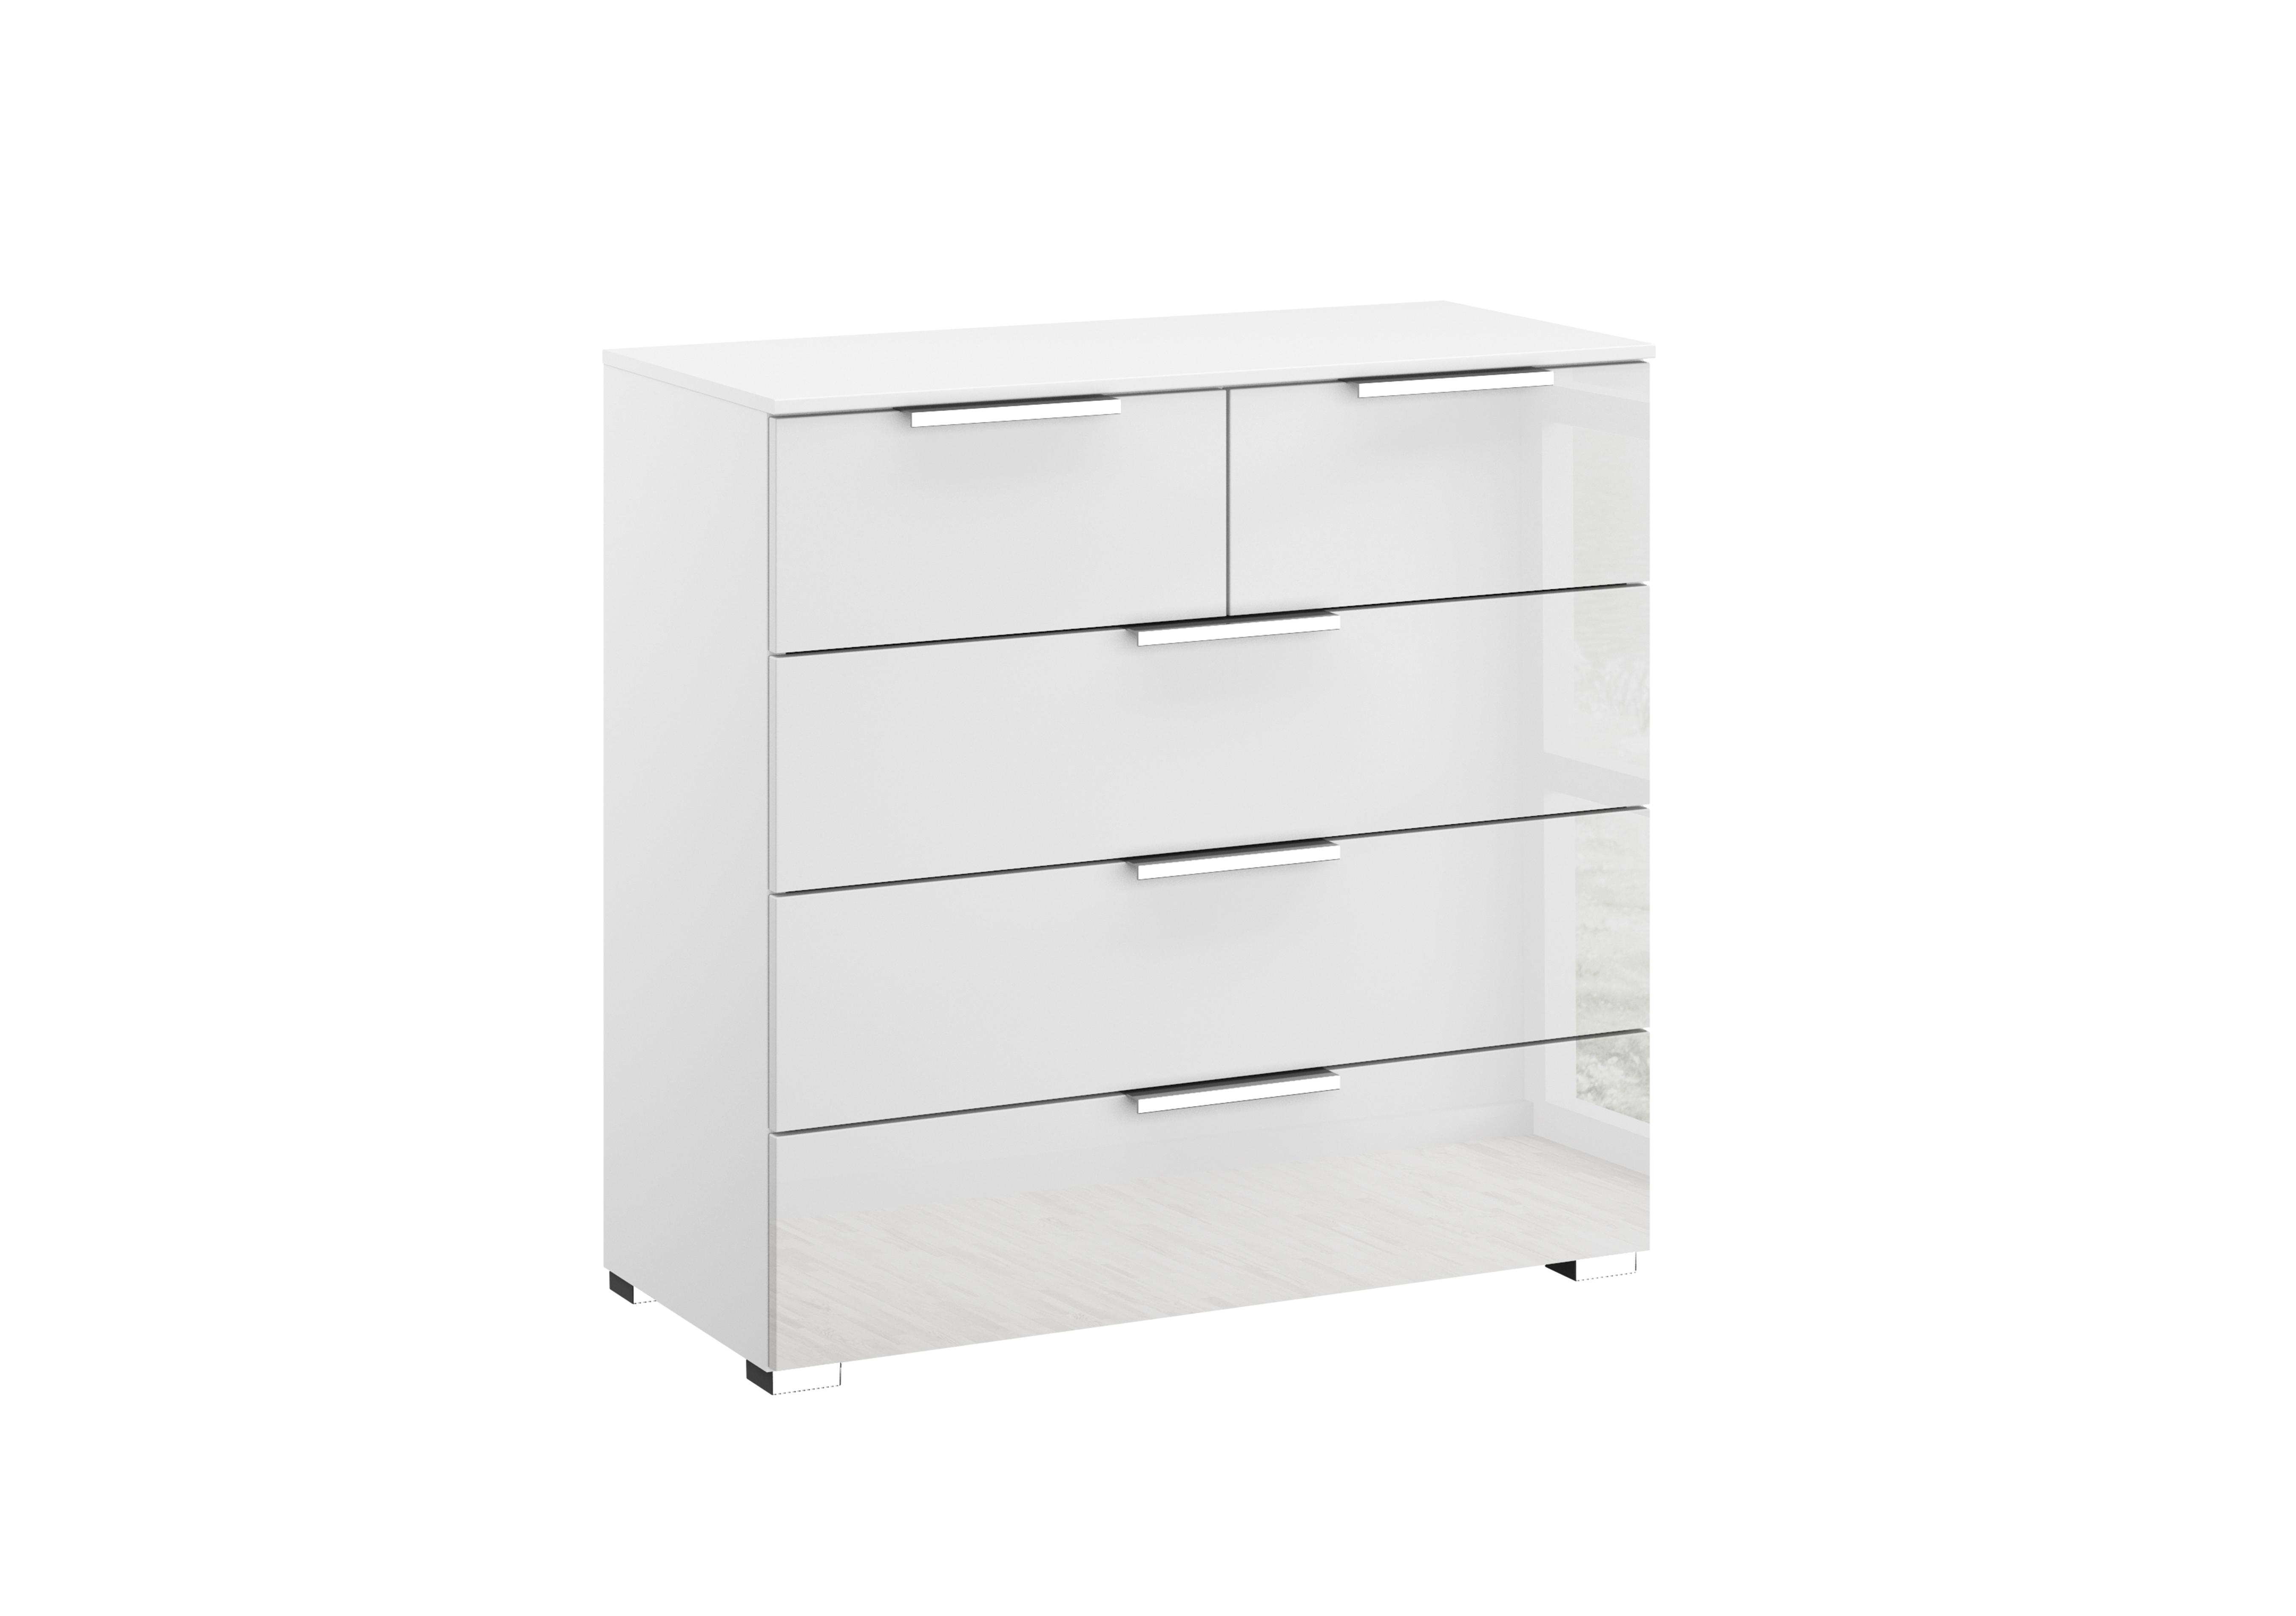 Formes Glass 5 Drawer Chest in A131b White White Front on Furniture Village